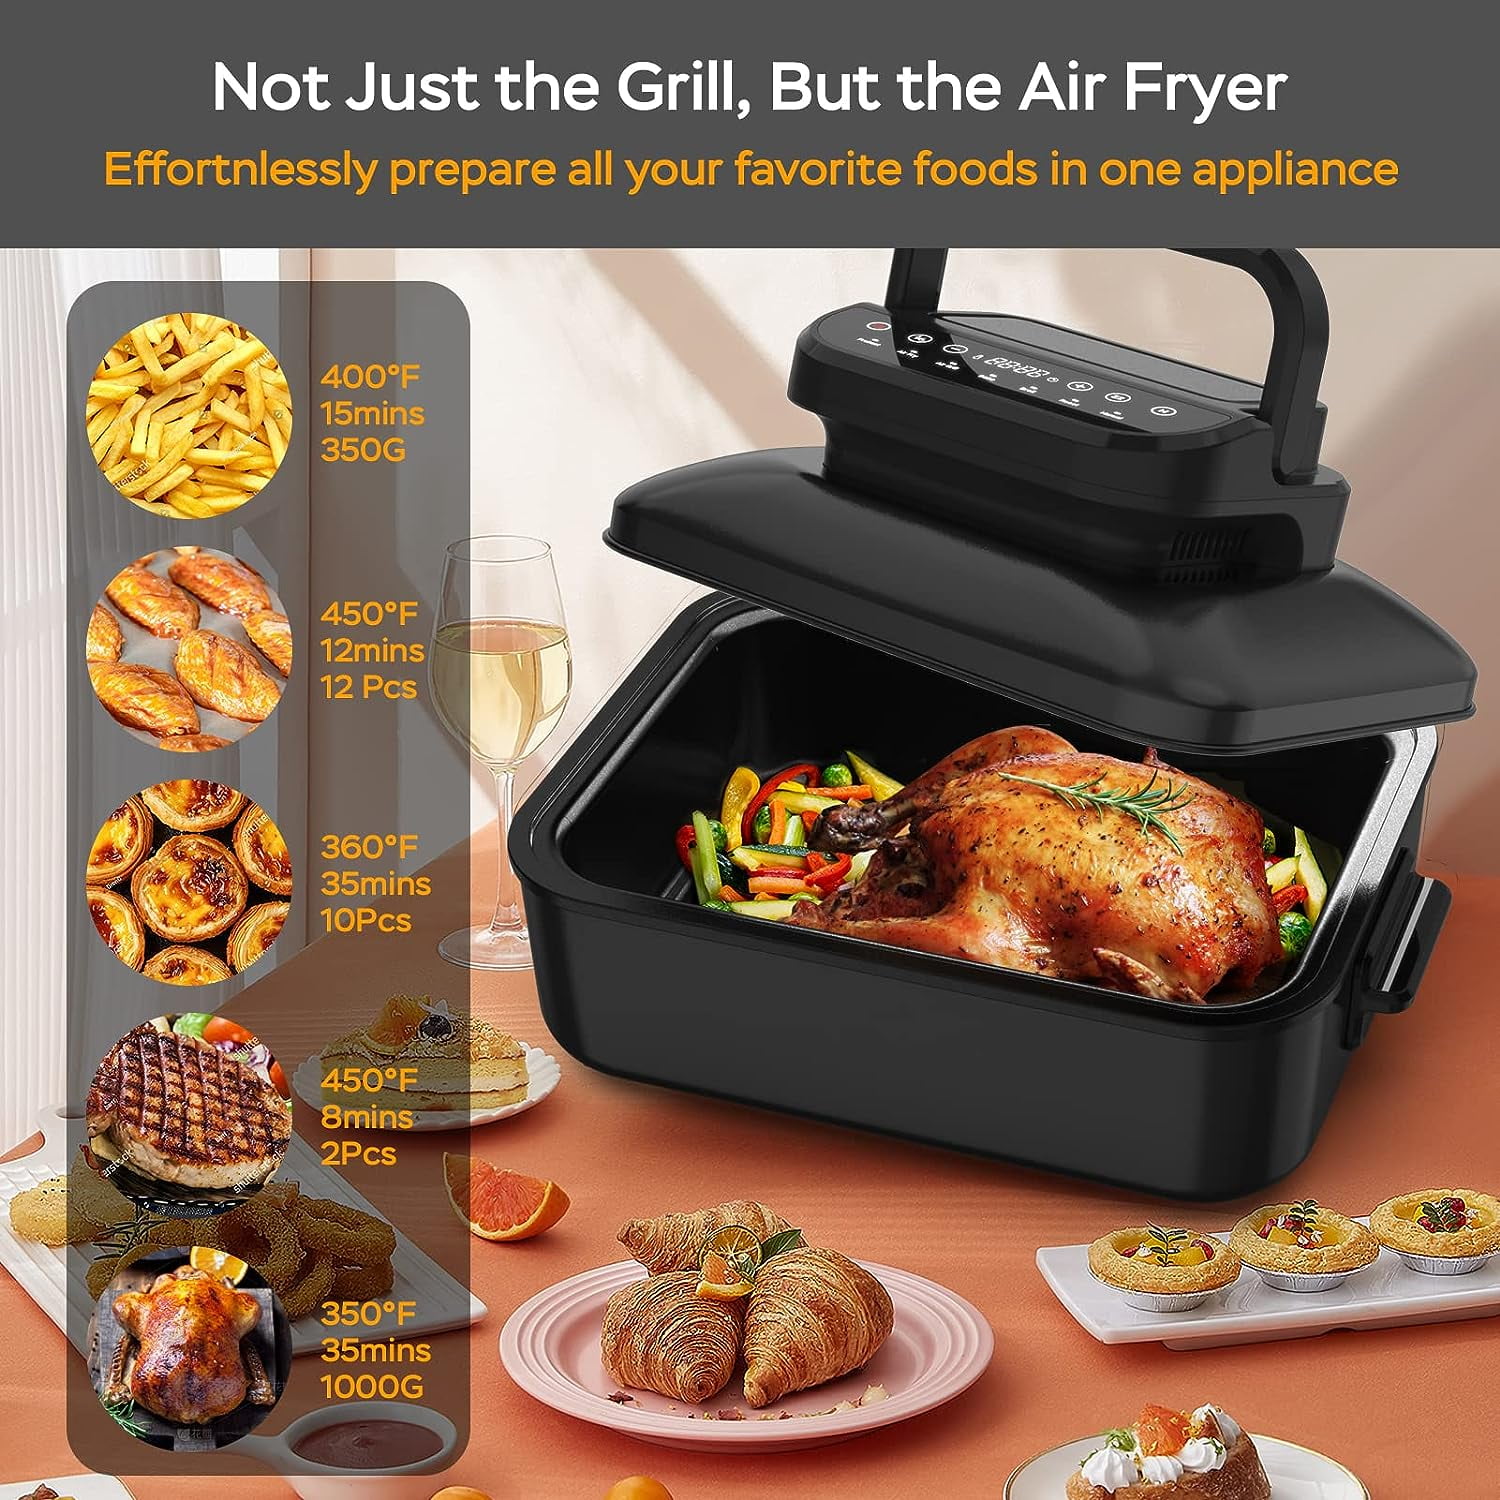  Zstar Indoor Grill Air Fryer Combo with See-Through Window,  7-in-1 Smokeless Electric Air Grill up to 450°F, 1750W Contact Grill with  Non-Stick Removable Plates, Even Heat, Silicon Tongs as Gift, 4Qt